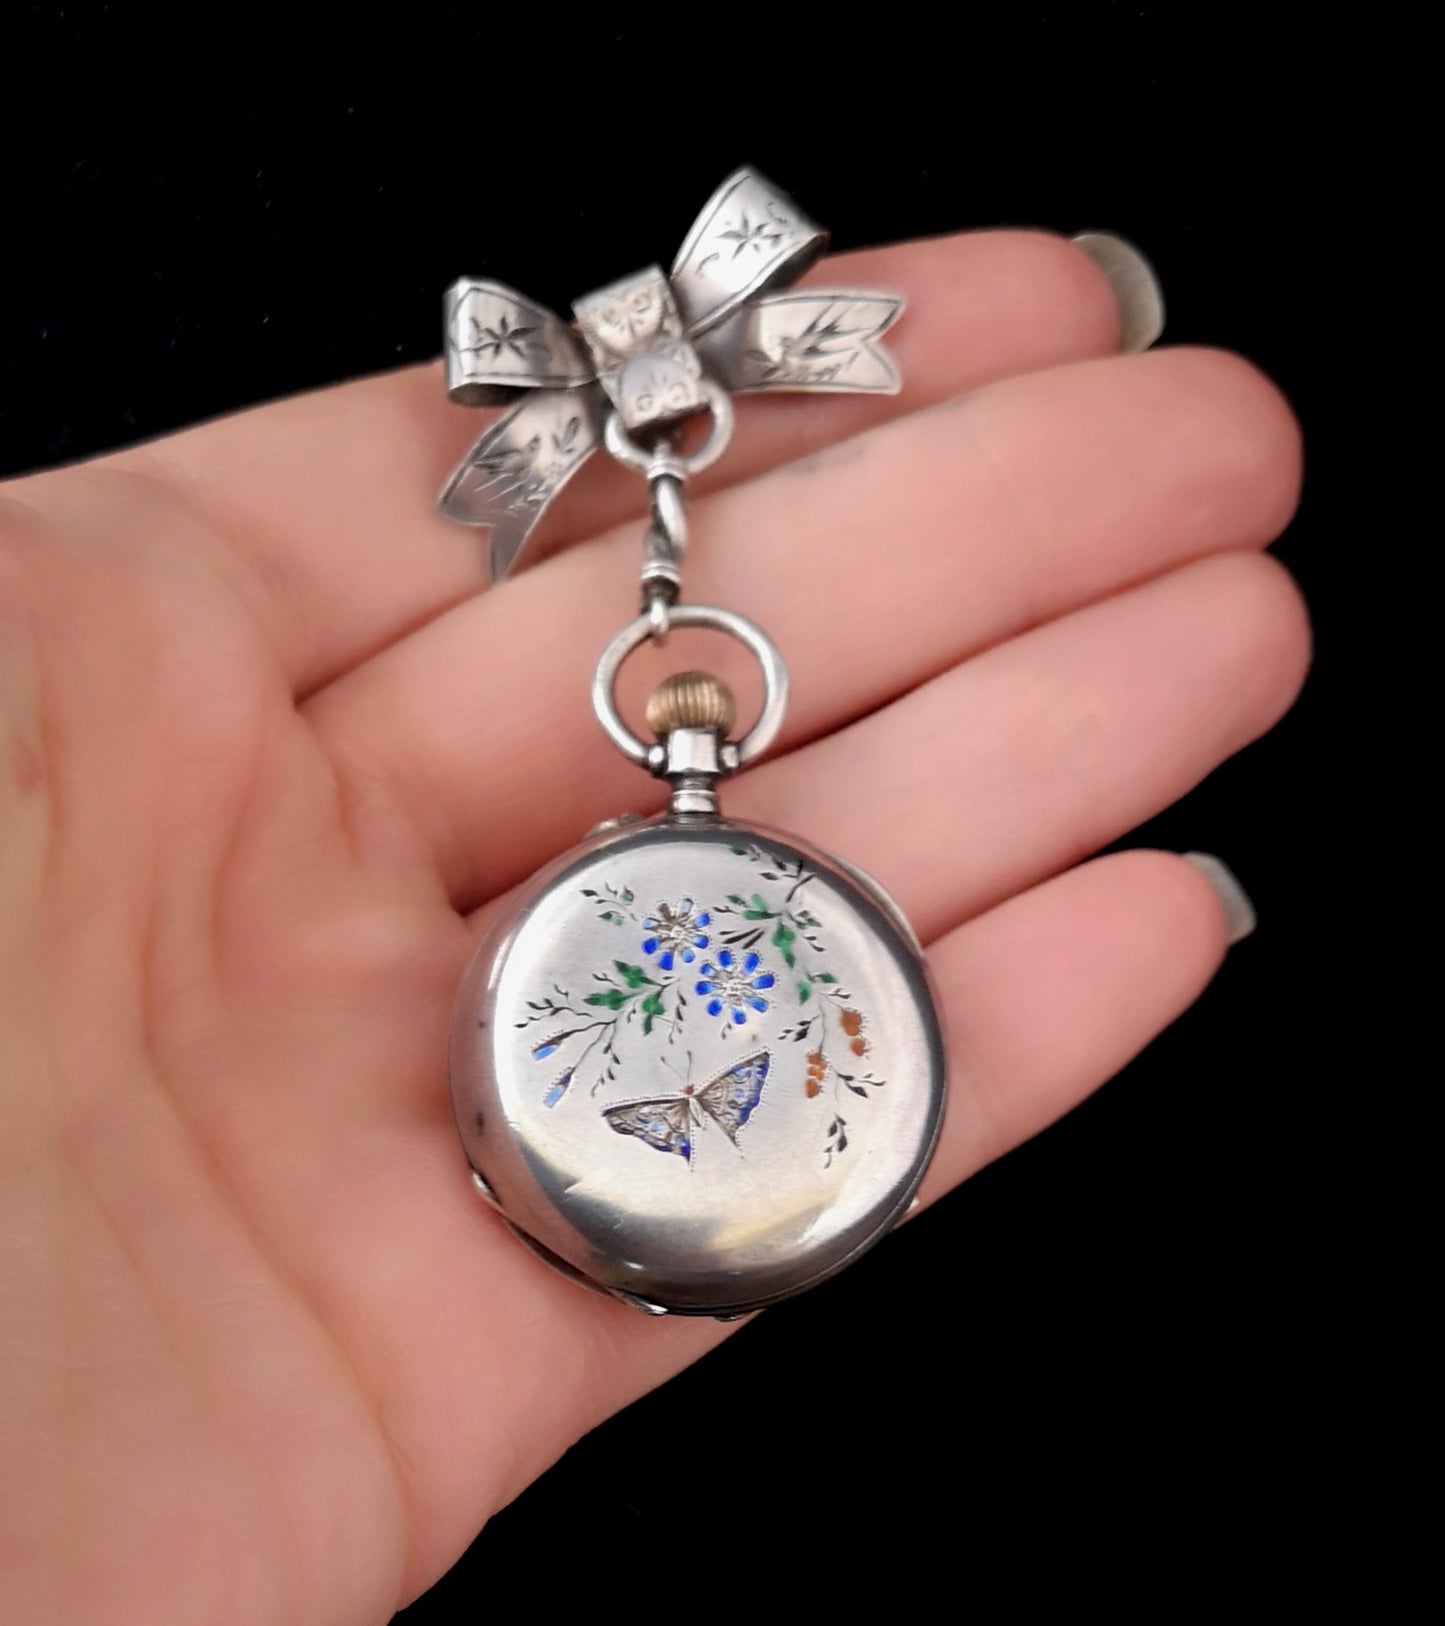 Victorian pocket watch, silver and enamel, bow brooch